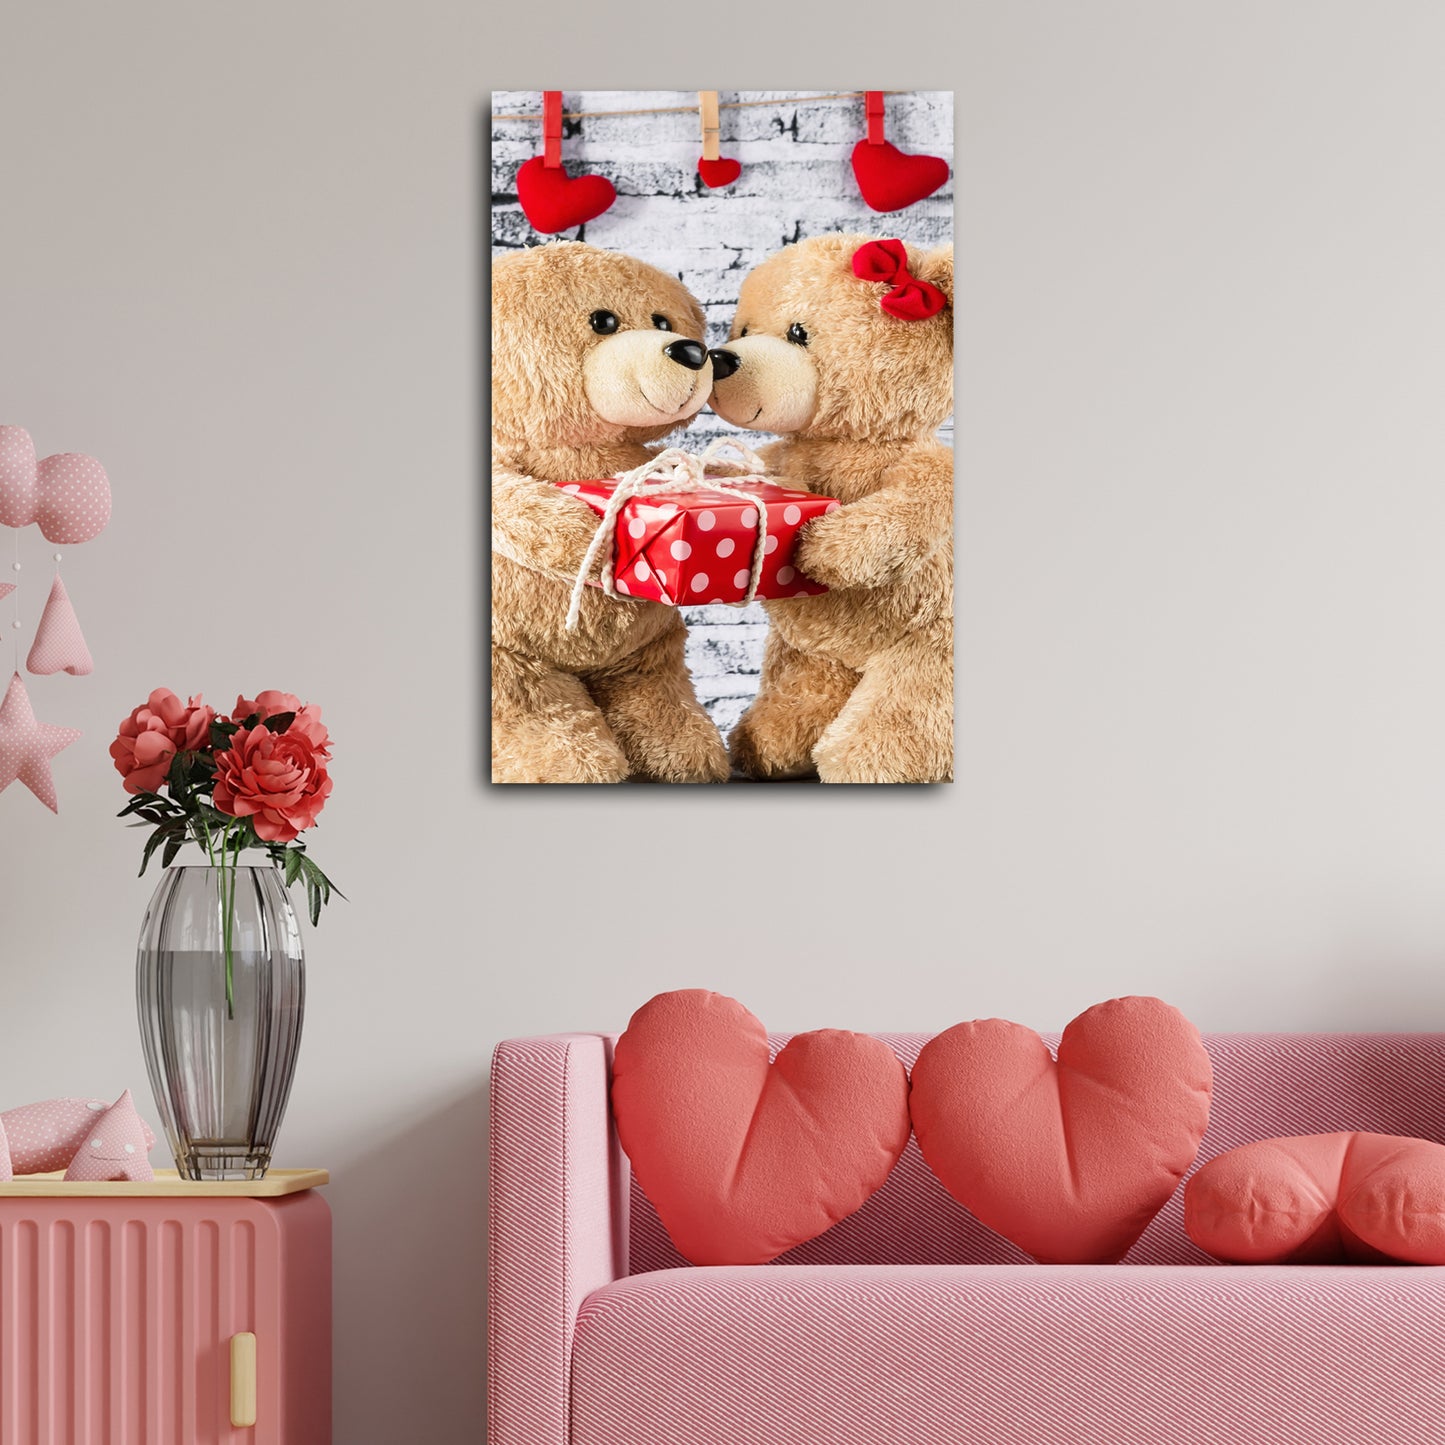 Valentine Teddy Bears Canvas Wall Art - Image by Tailored Canvases